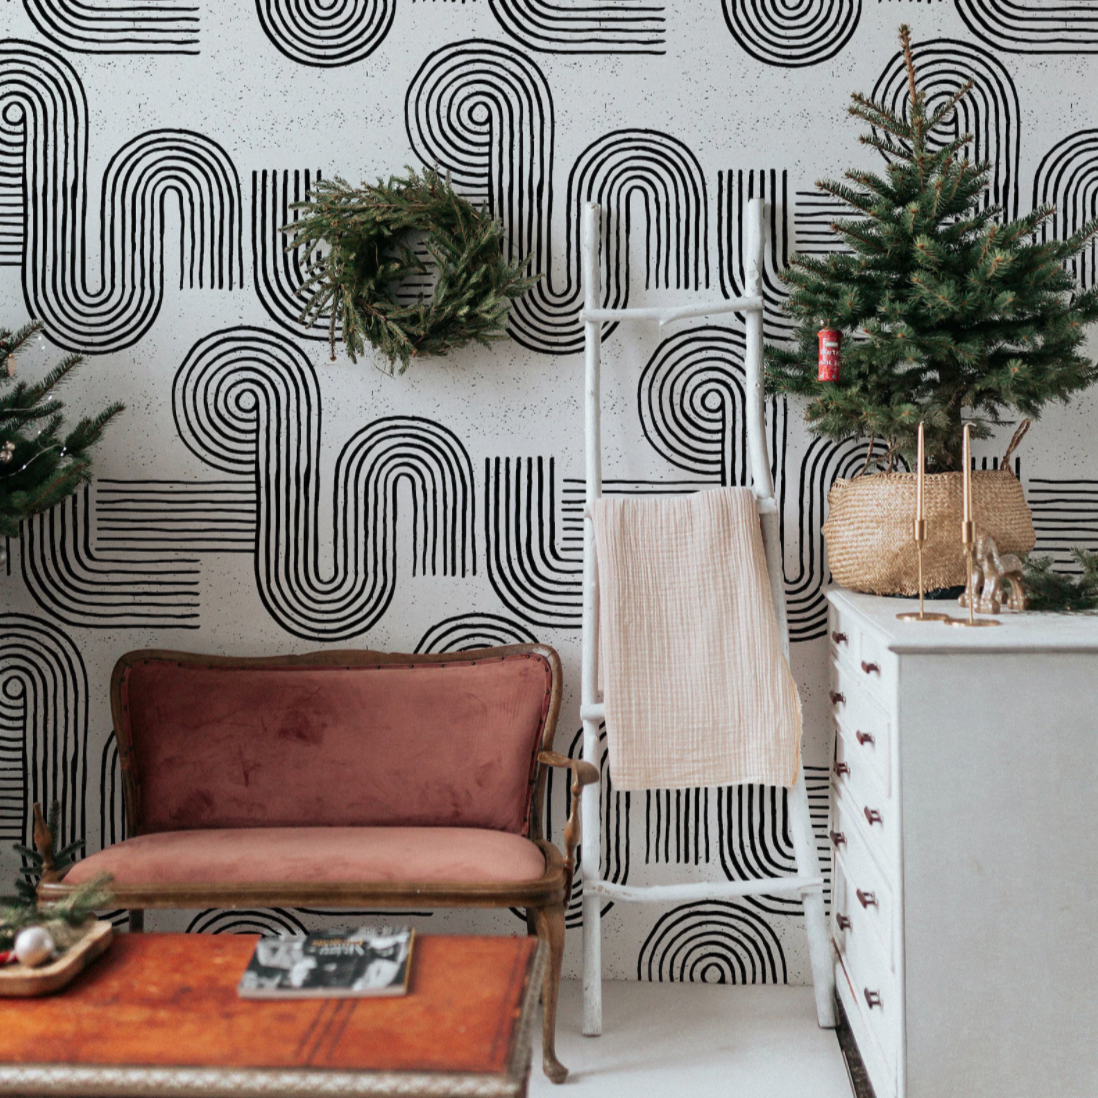 A cozy living space enhanced by the Zen Abstract Wallpaper, which provides a bold yet tranquil background to the vintage furniture and holiday decor, evoking a sense of modern serenity.